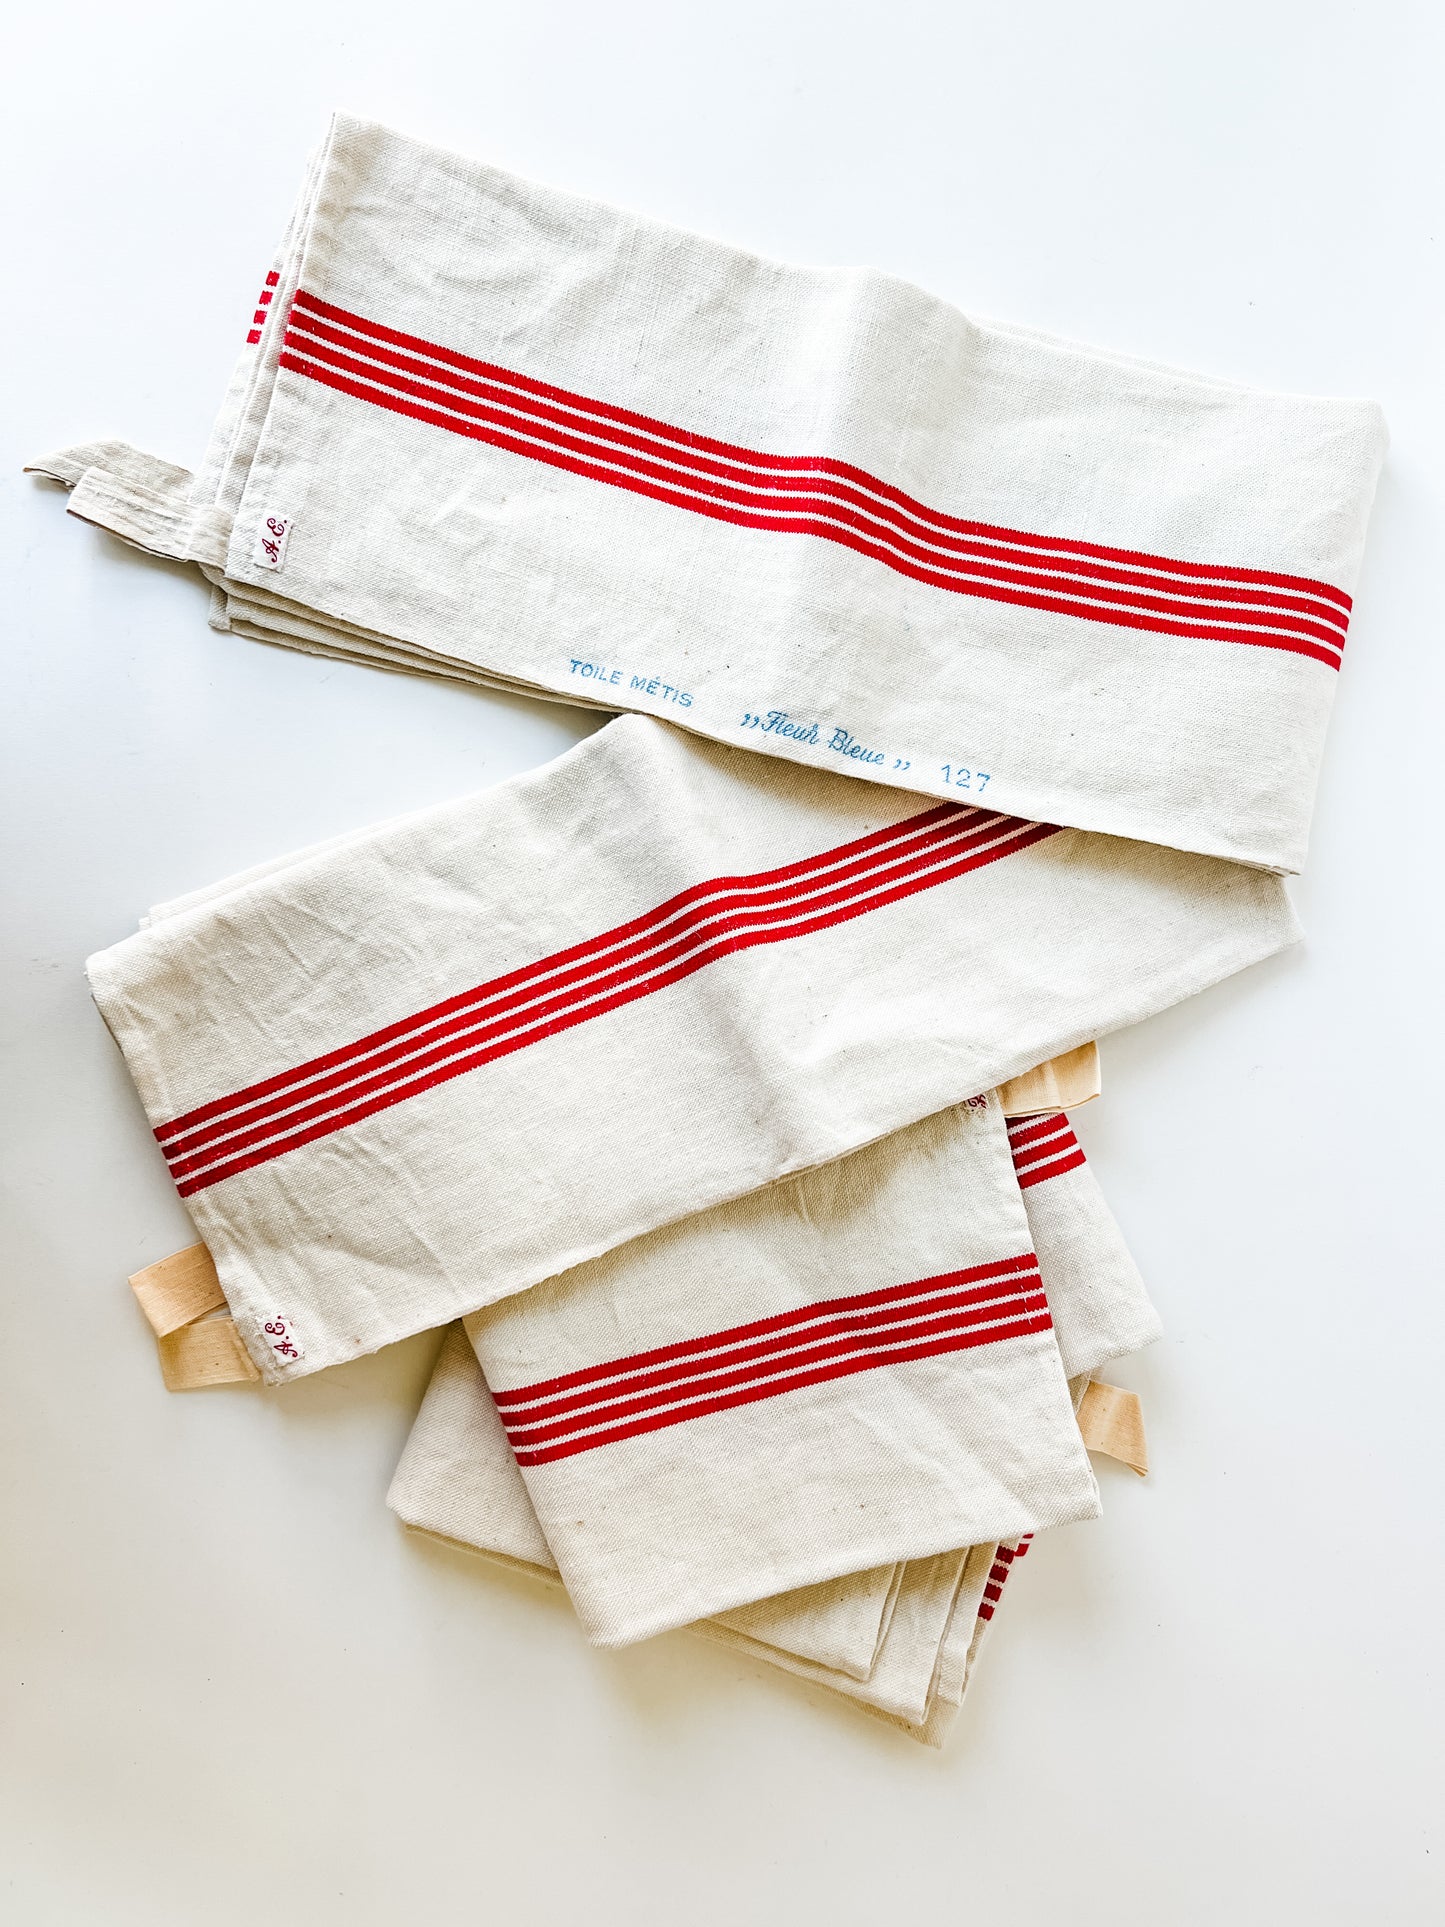 Vintage French Tea Towels (4 thicker red stripes)